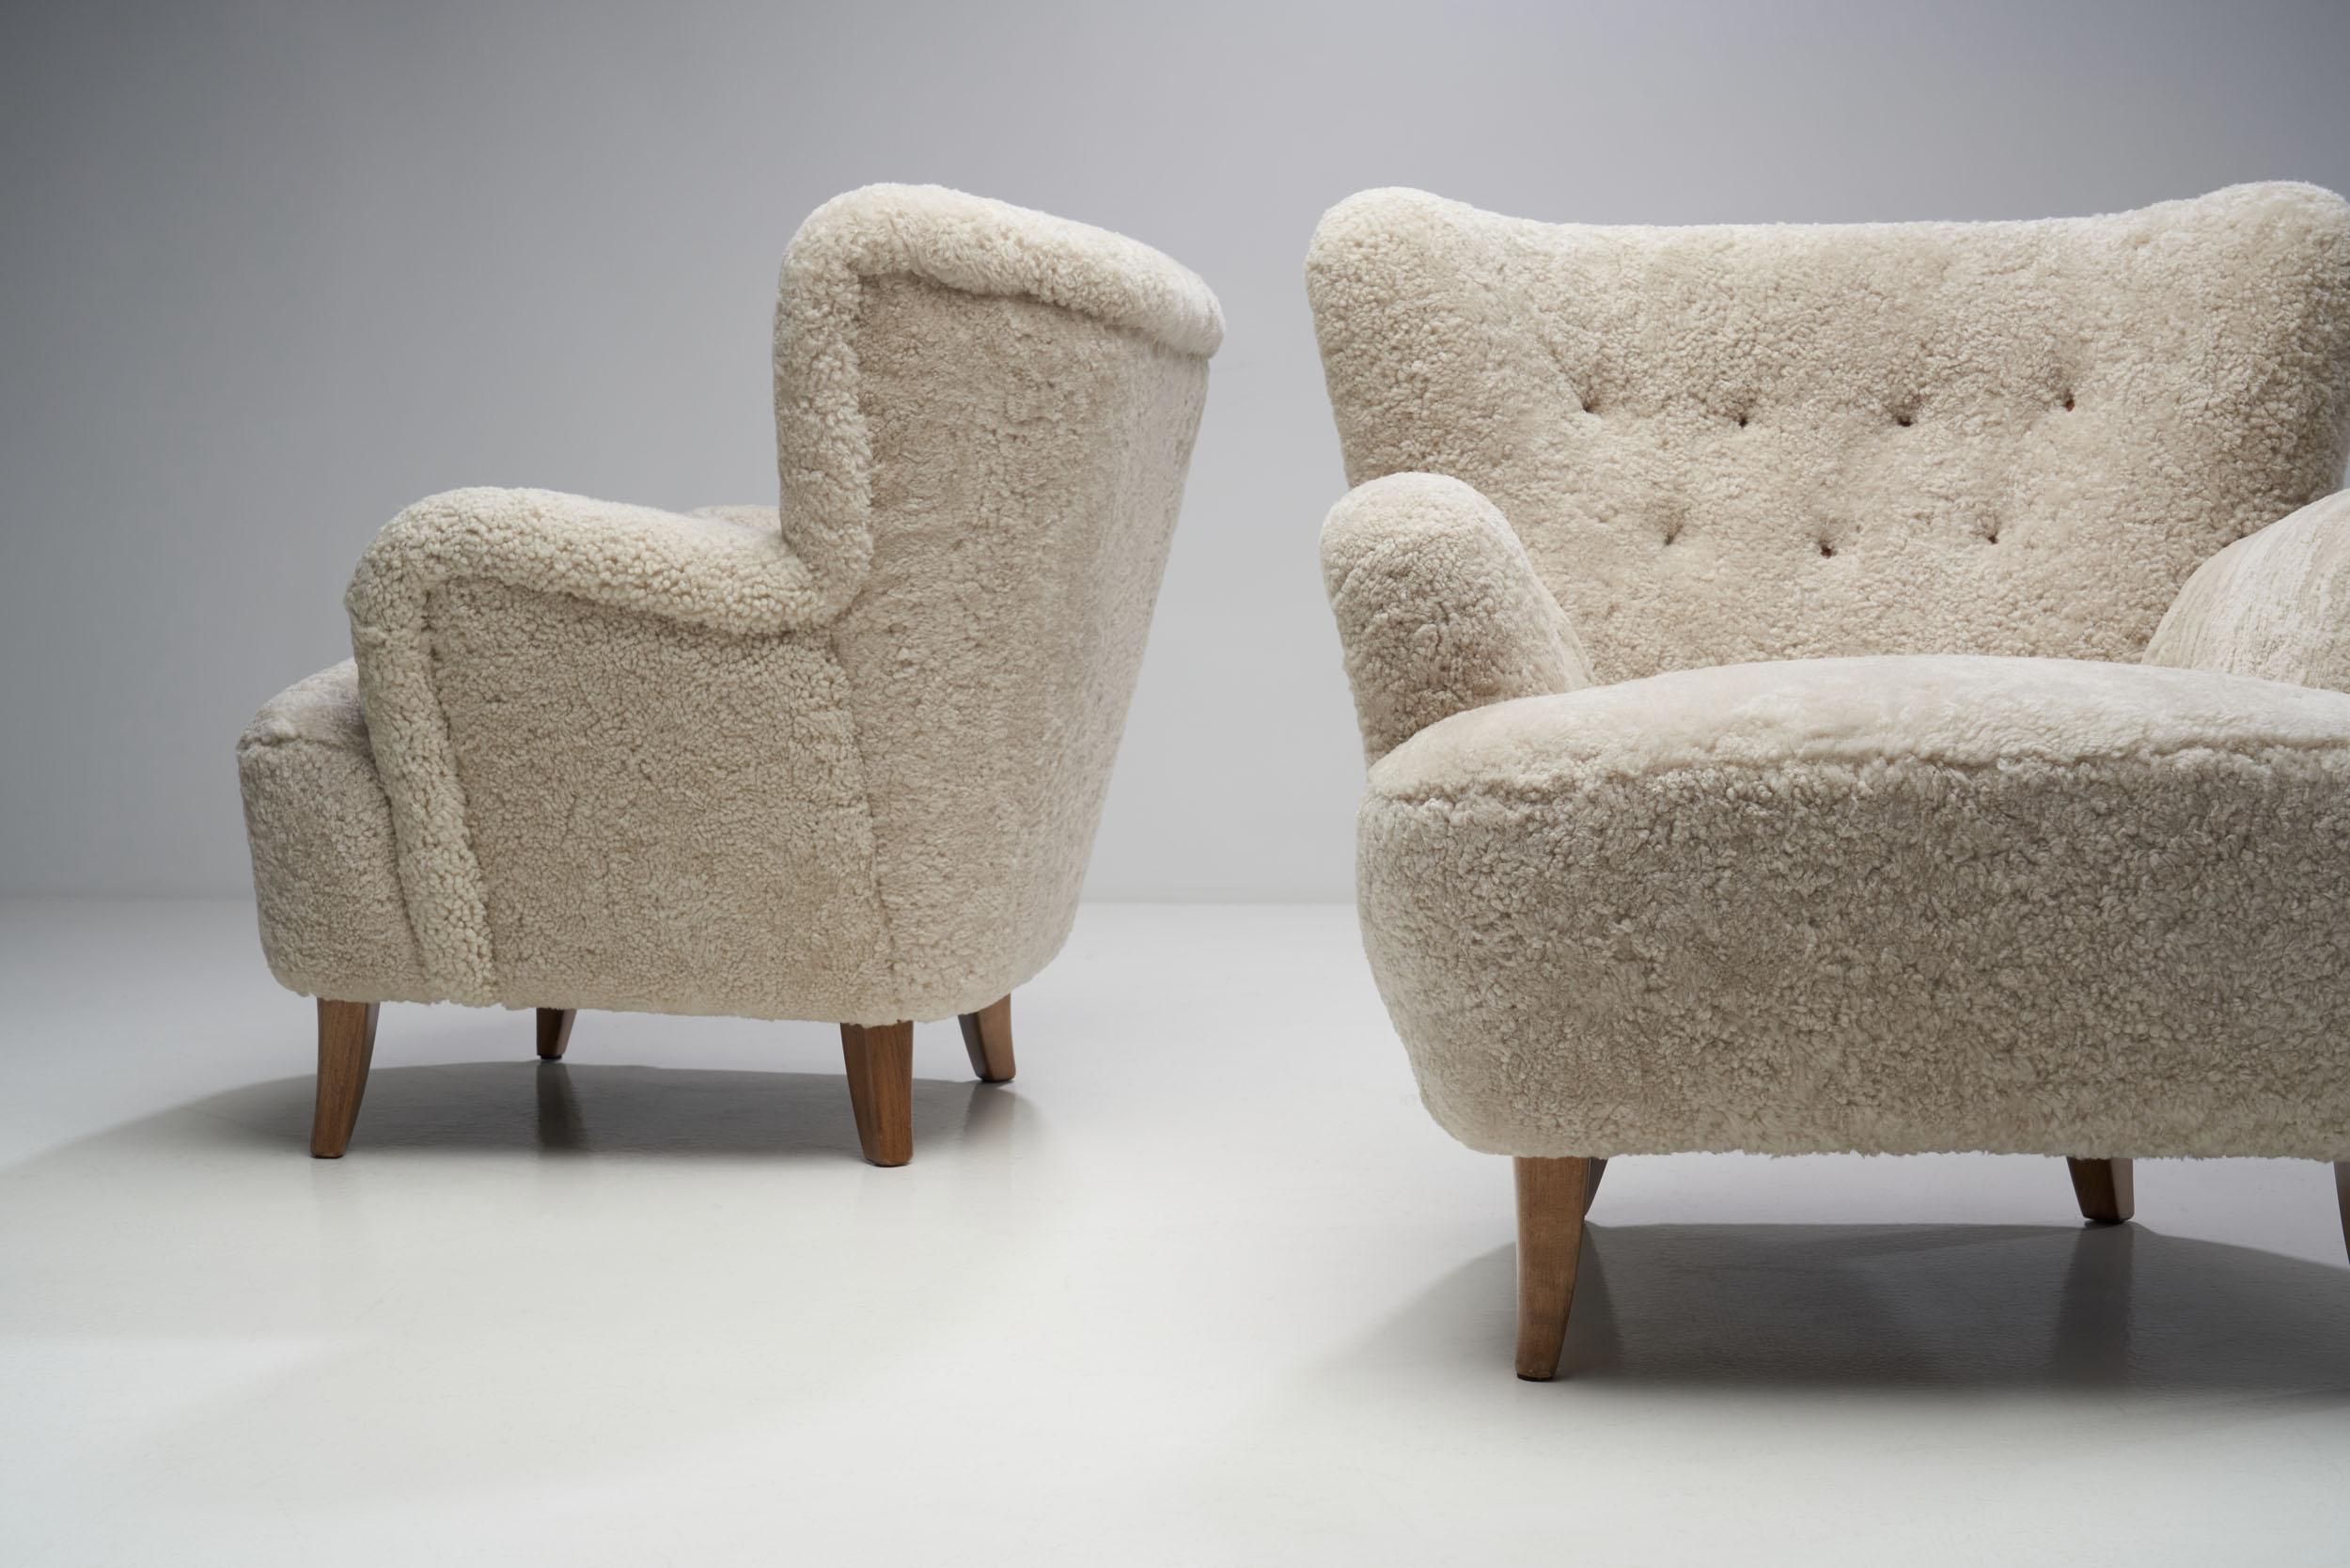 Mid-20th Century Pair of “Laila” Armchairs in Sheepskin by Ilmari Lappalainen, Finland 1948 For Sale